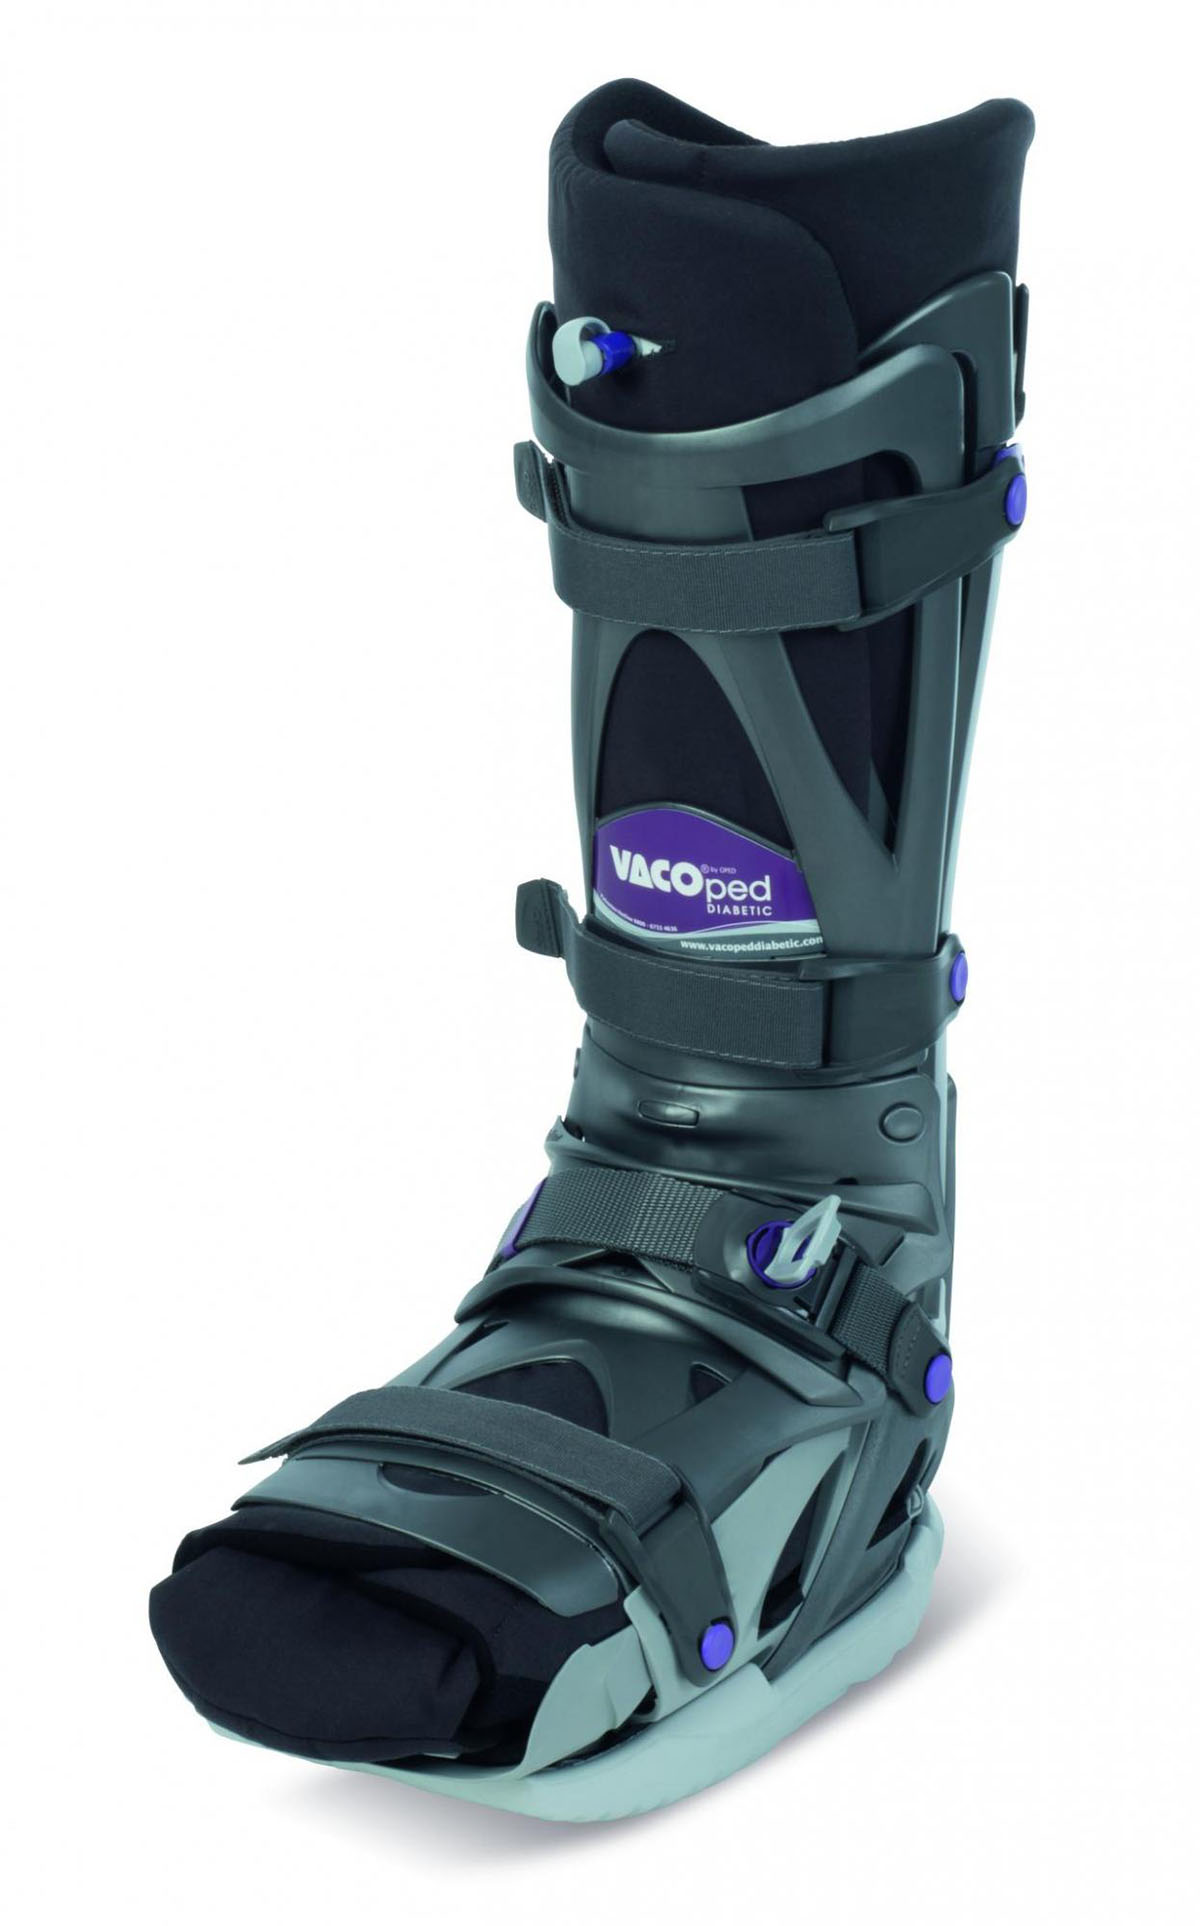 VACOcast Extra Stable Diabetic Boot, Medium For Sale